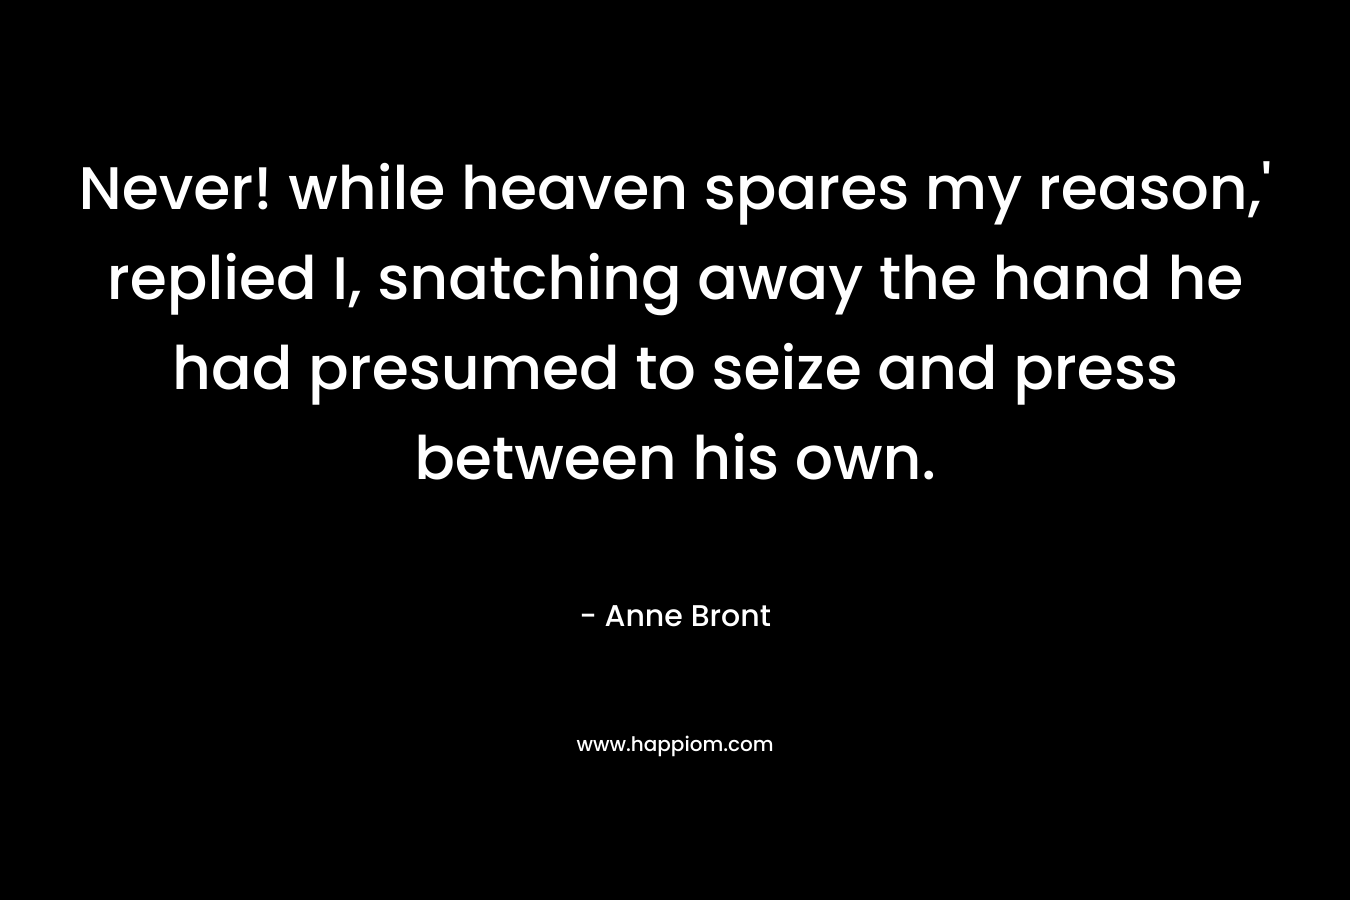 Never! while heaven spares my reason,’ replied I, snatching away the hand he had presumed to seize and press between his own. – Anne Bront